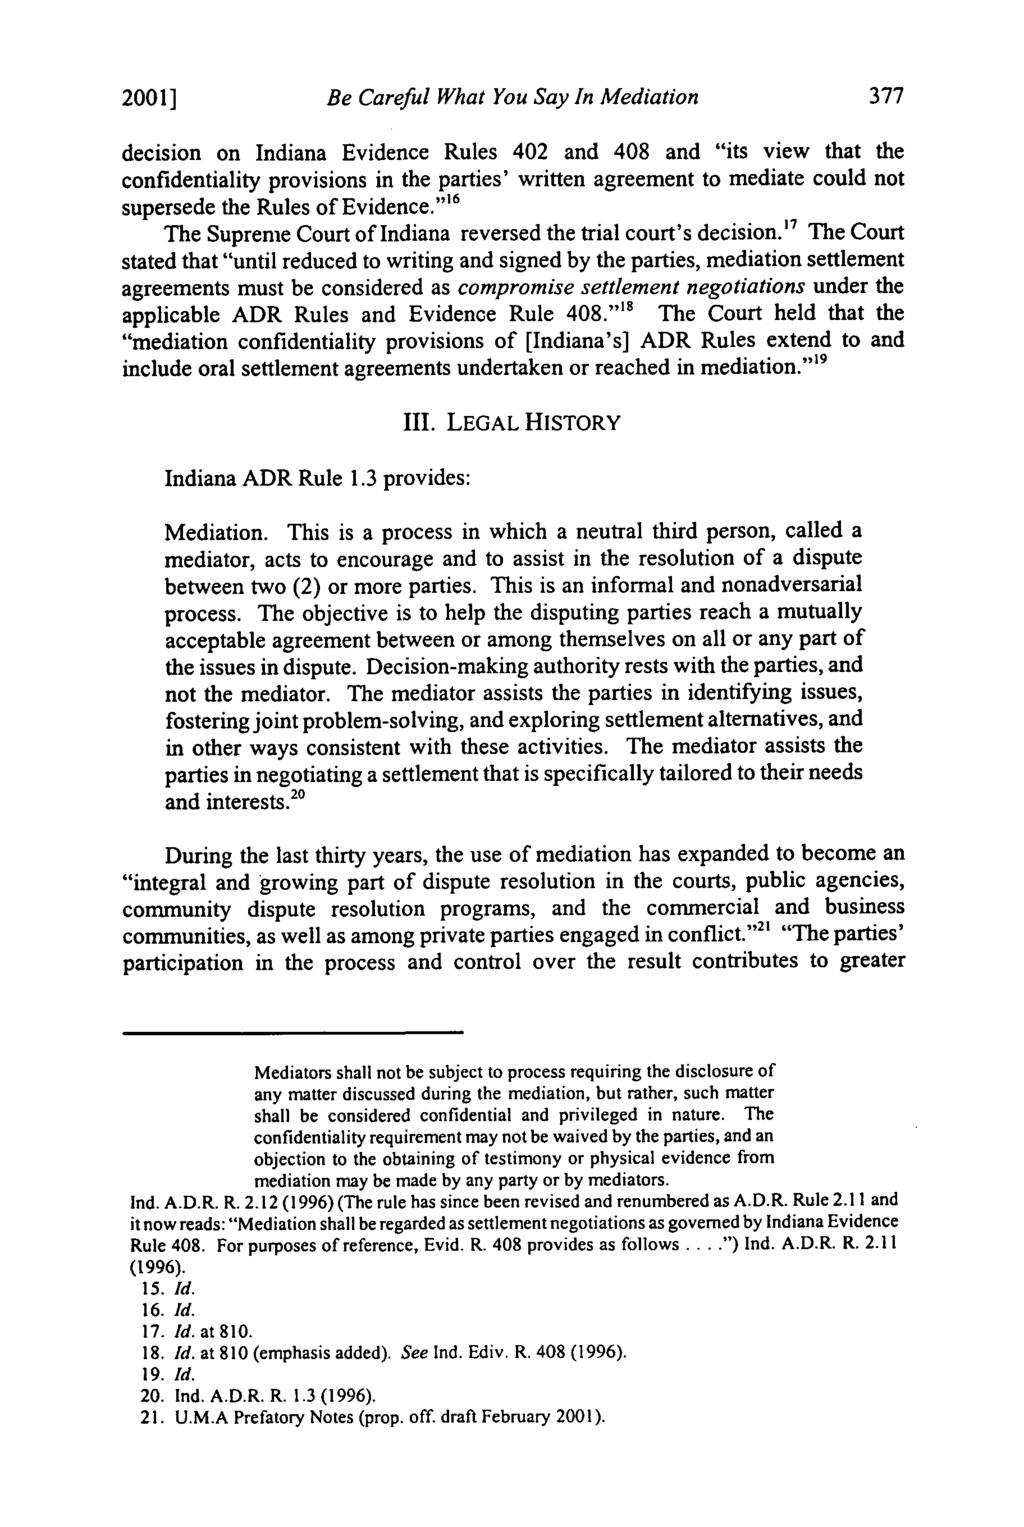 2001] Taylor: Taylor: Be Careful What You Say in Mediation Be Careful What You Say In Mediation decision on Indiana Evidence Rules 402 and 408 and "its view that the confidentiality provisions in the